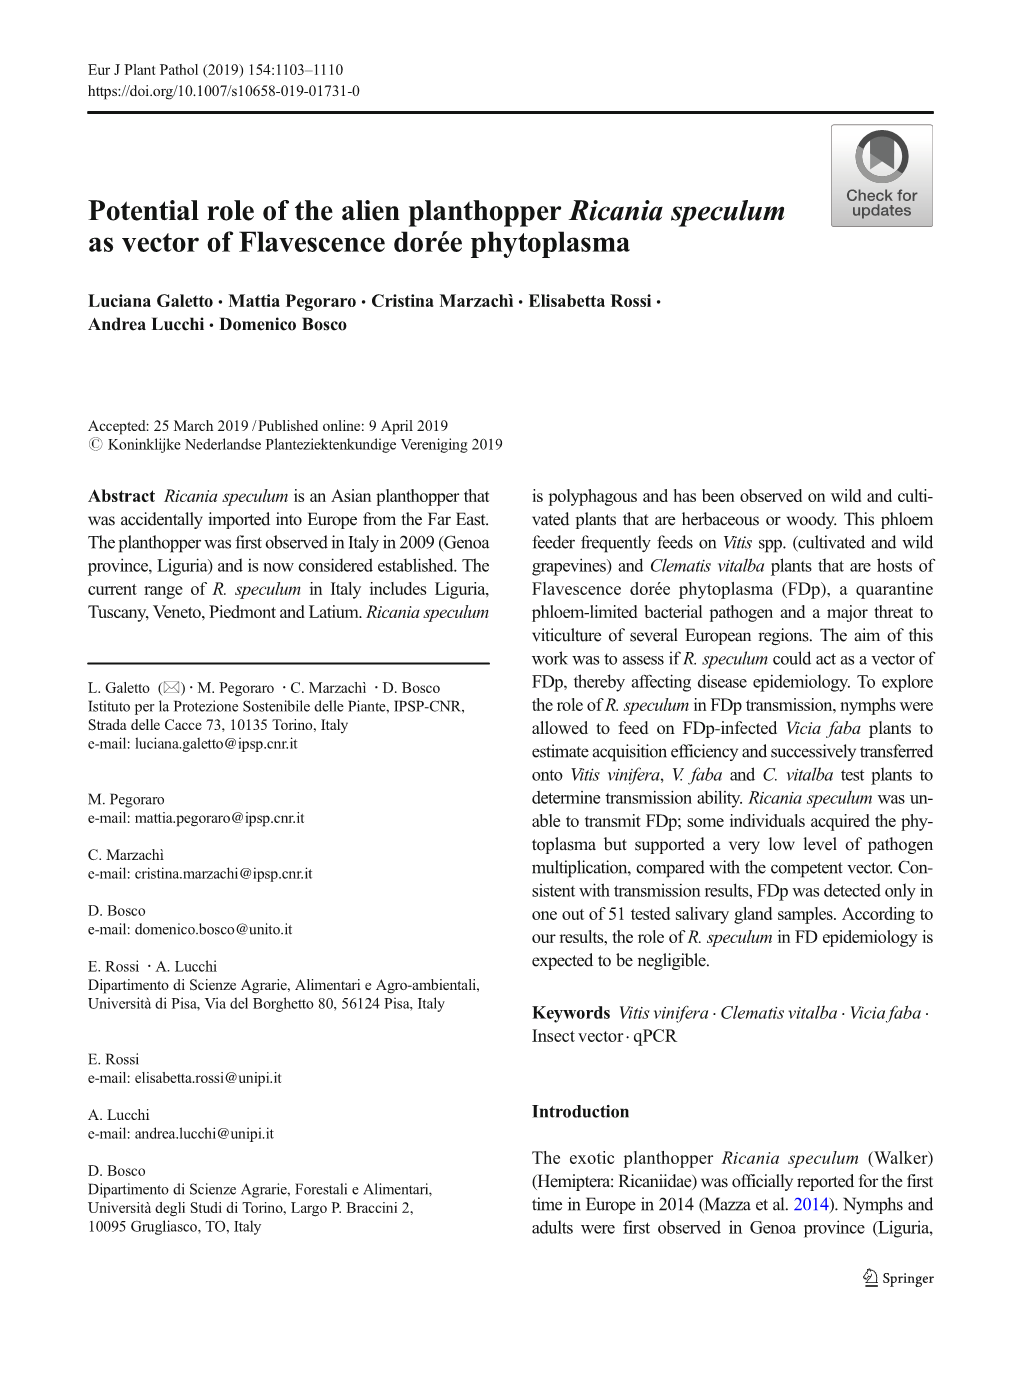 Potential Role of the Alien Planthopper Ricania Speculum As Vector of Flavescence Dorée Phytoplasma